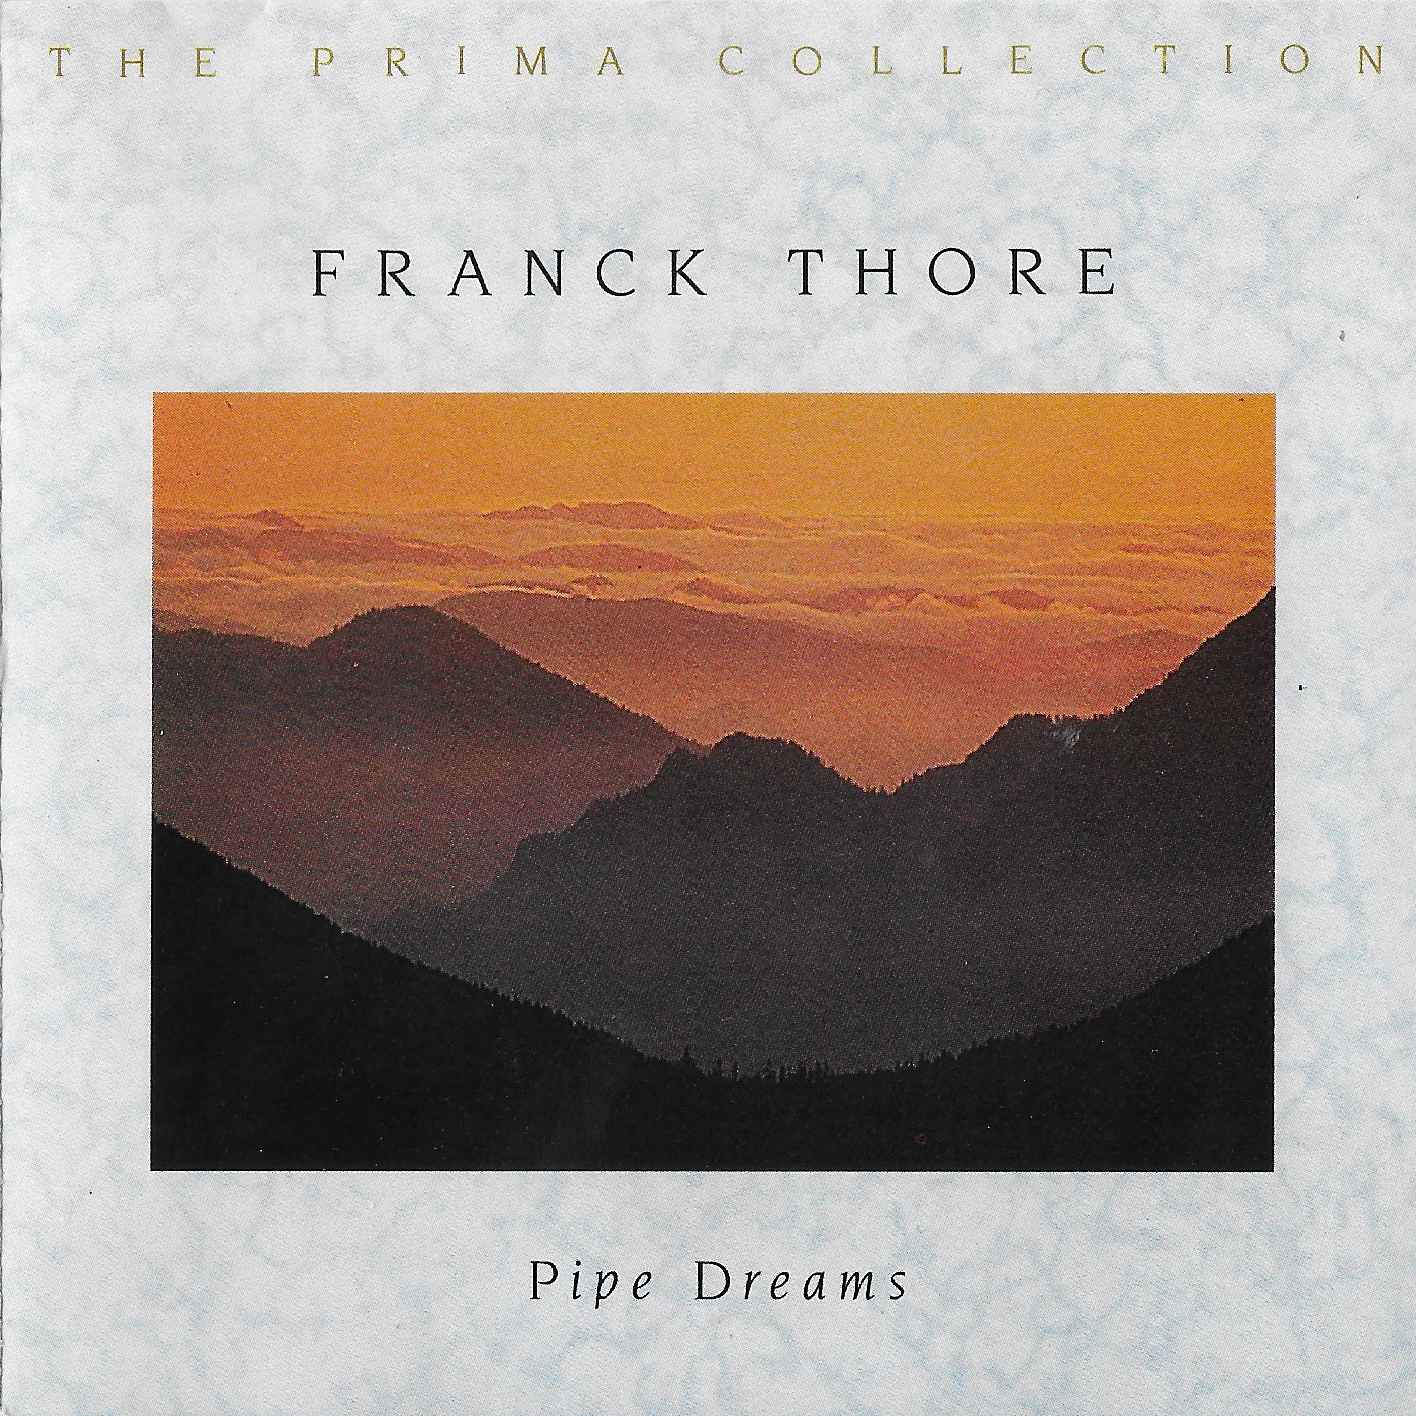 Picture of Pipe dreams by artist Frank Thore from the BBC cds - Records and Tapes library